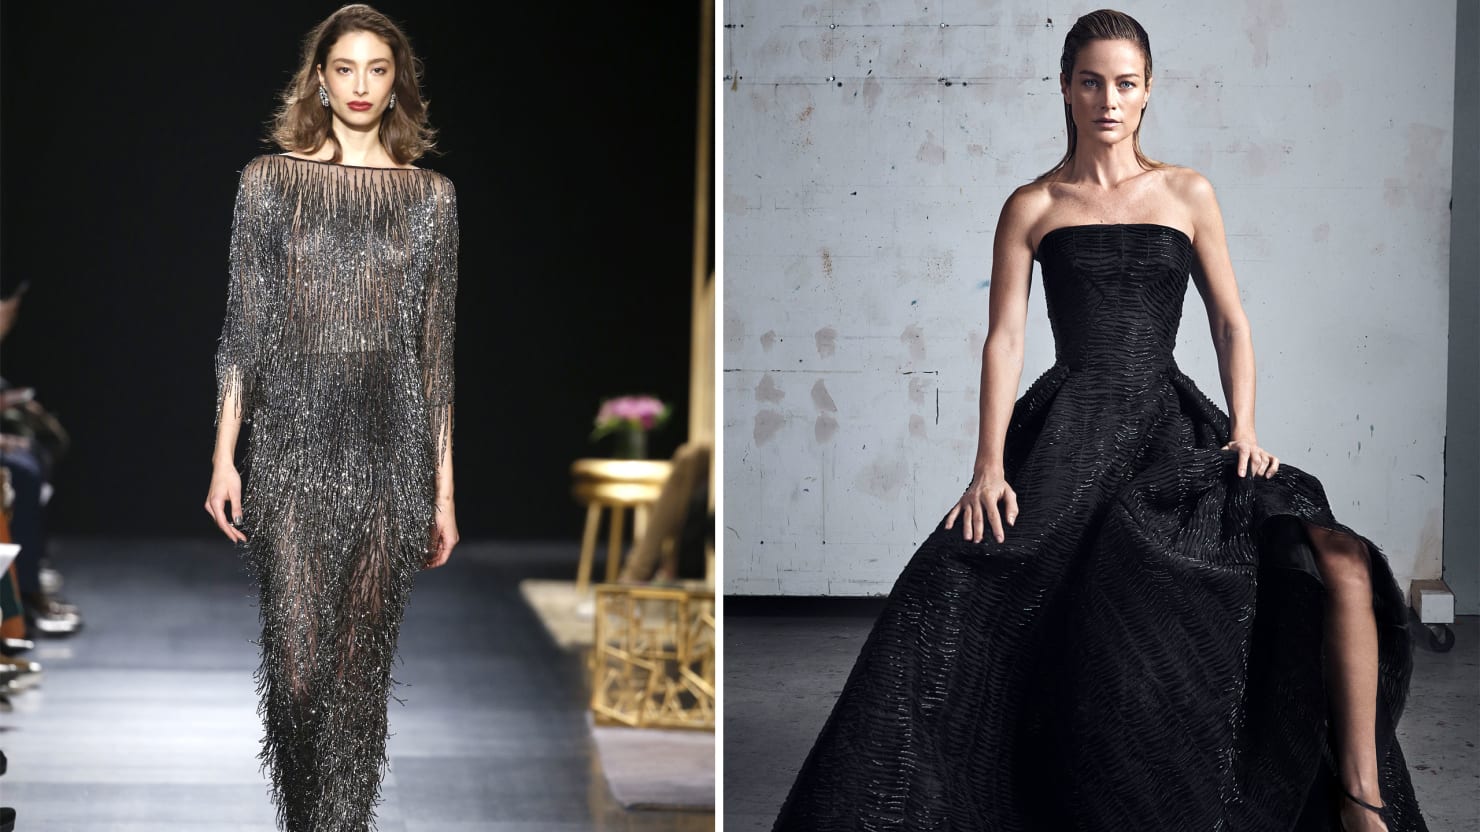 New York Fashion Week Dresses for the Oscars: Reviews of Badgley ...